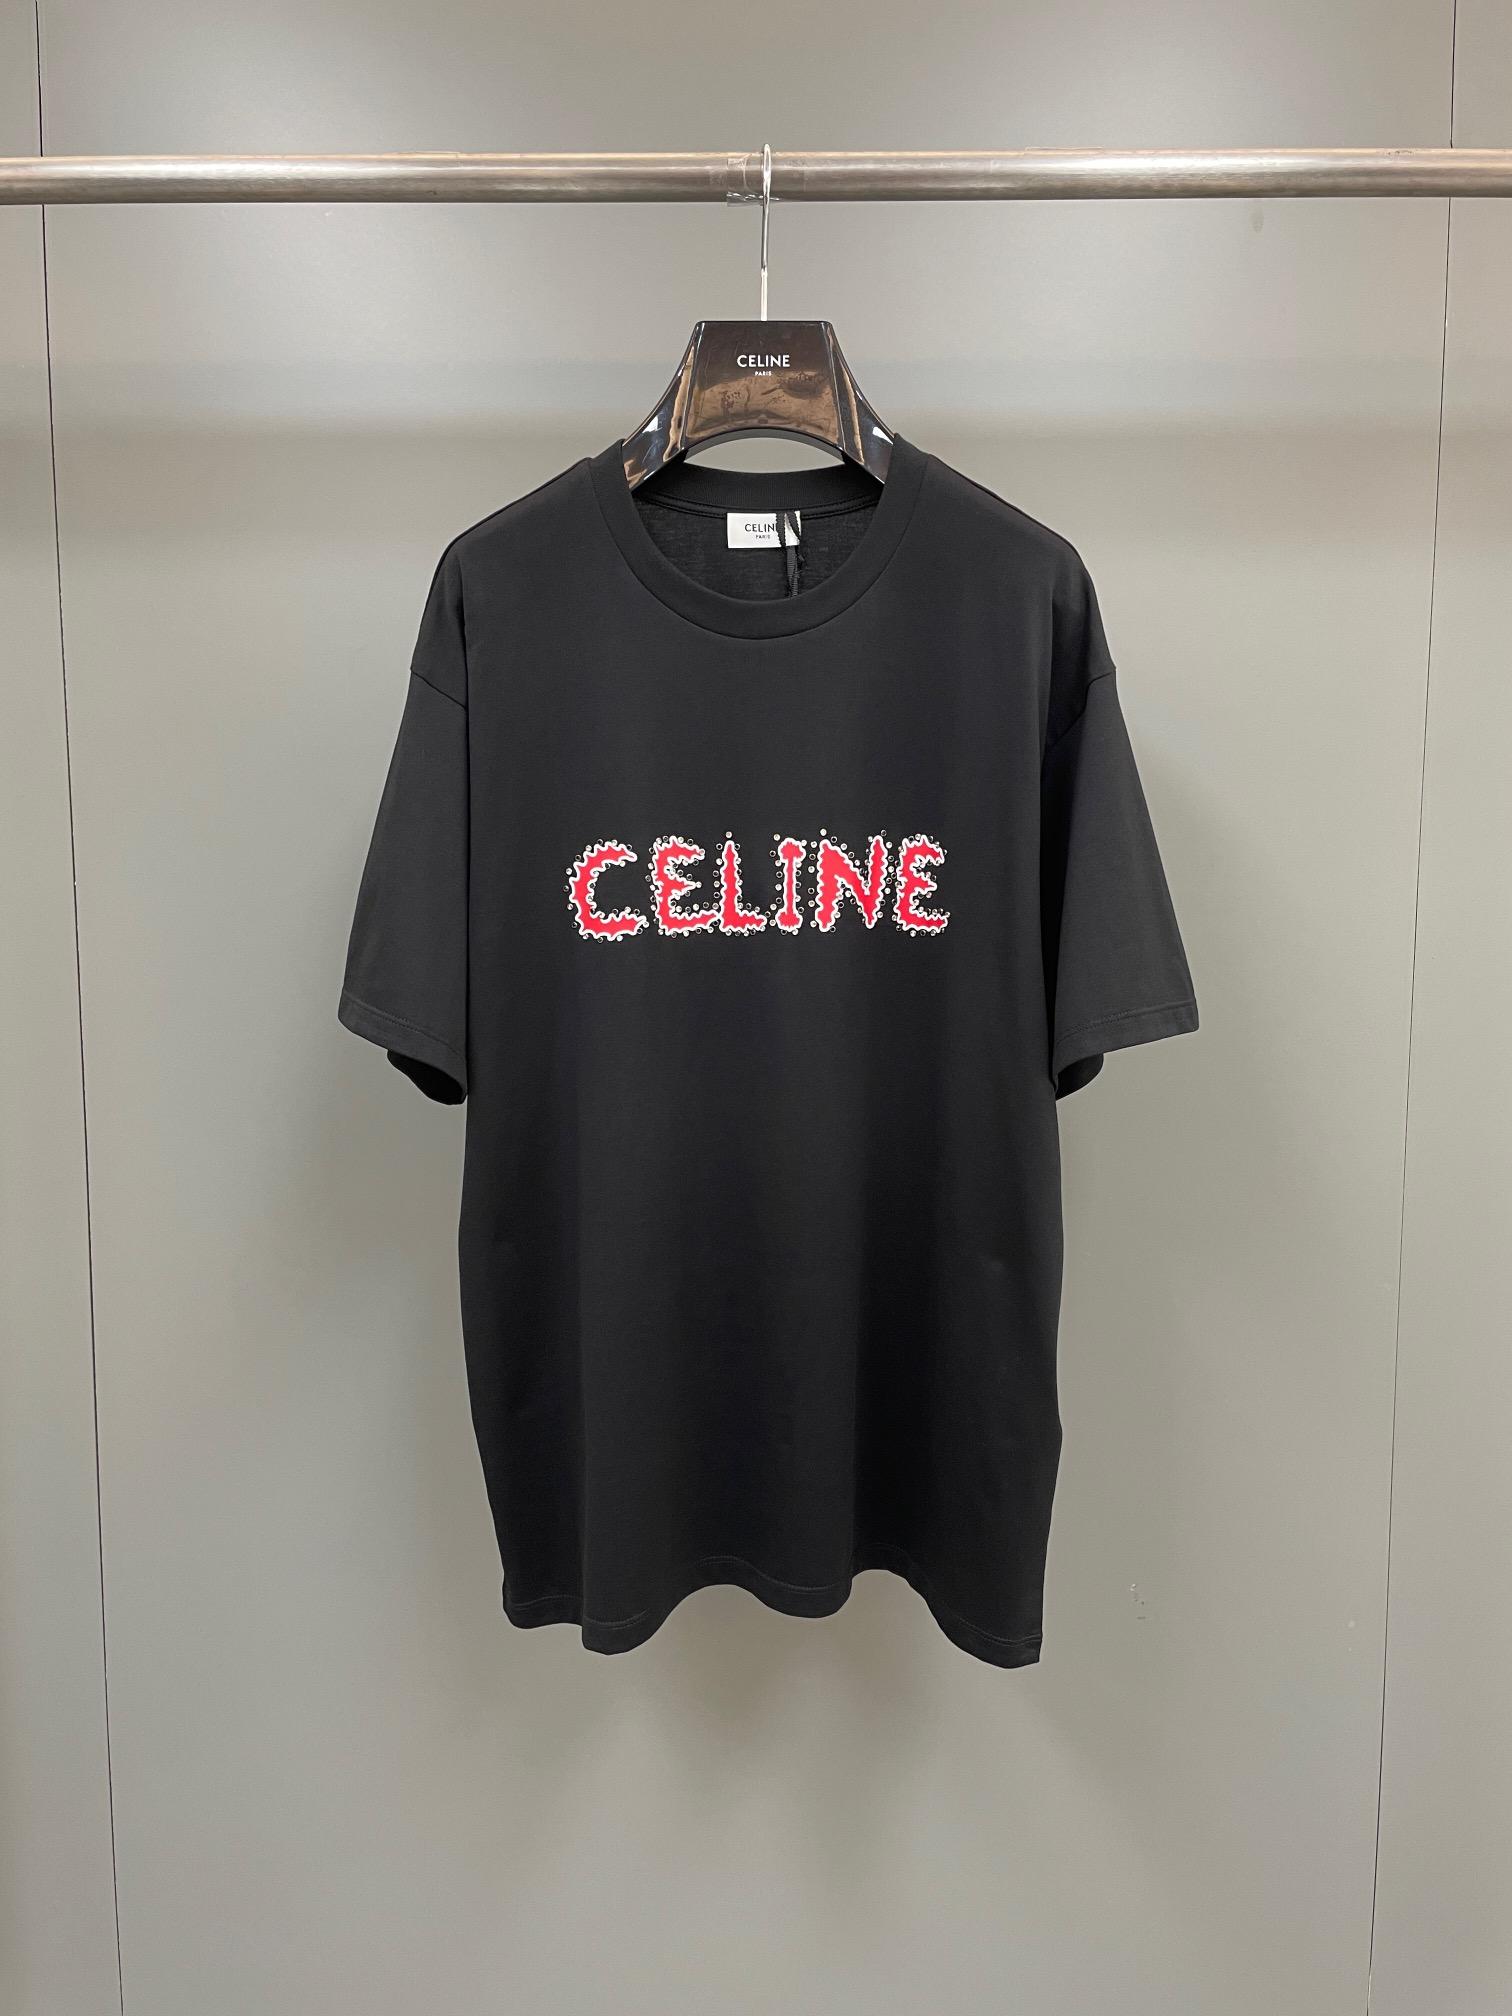 loose-celine-cotton-jersey-t-shirt-with-rhinestones-5845_16845010842-1000